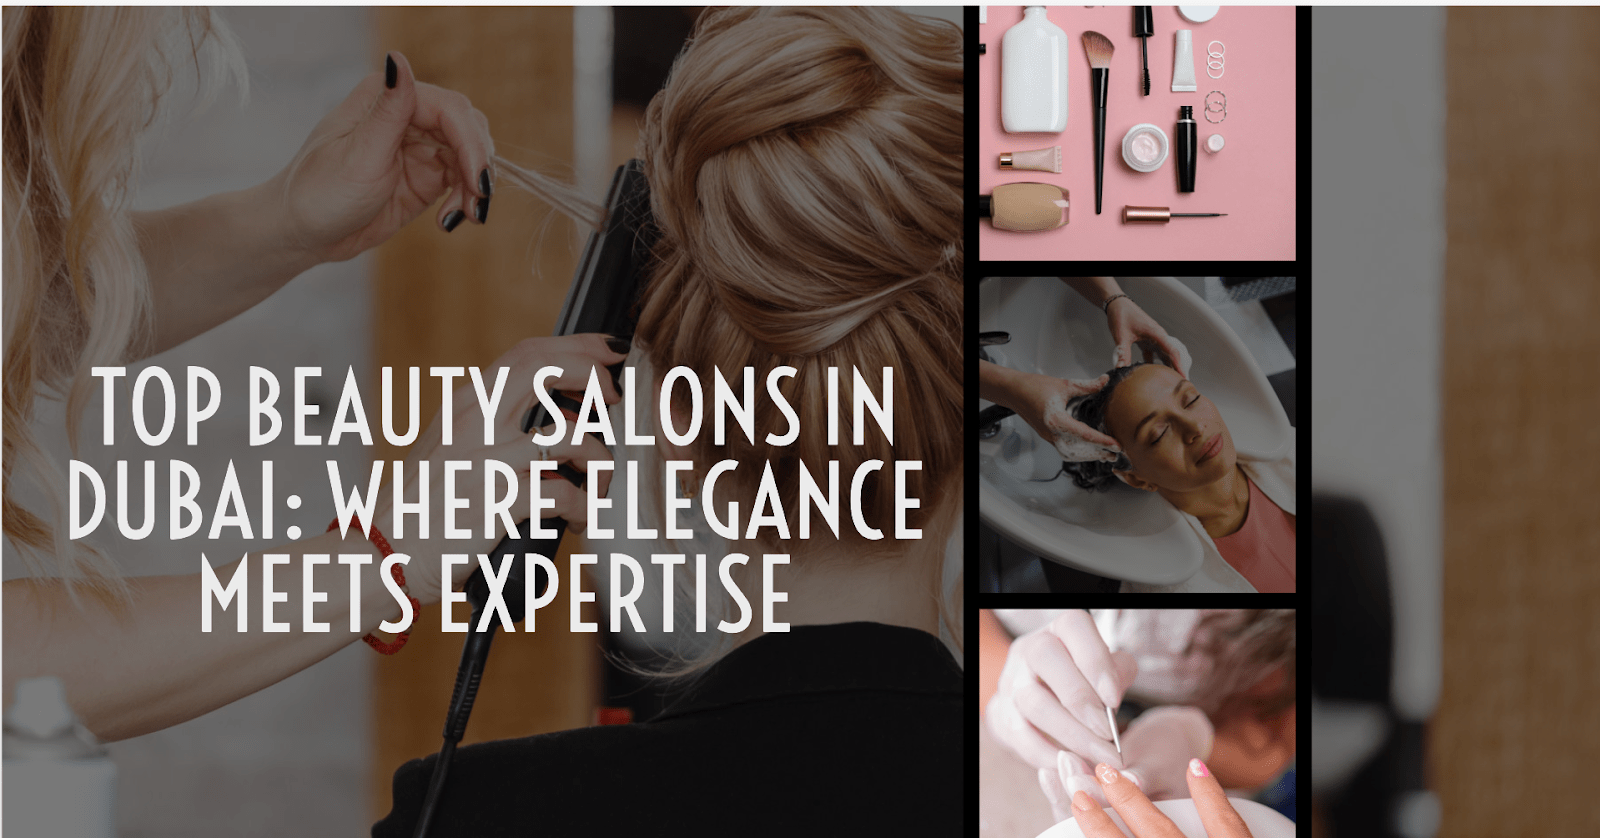 Tried and tested salon services in Dubai - What's On Dubai